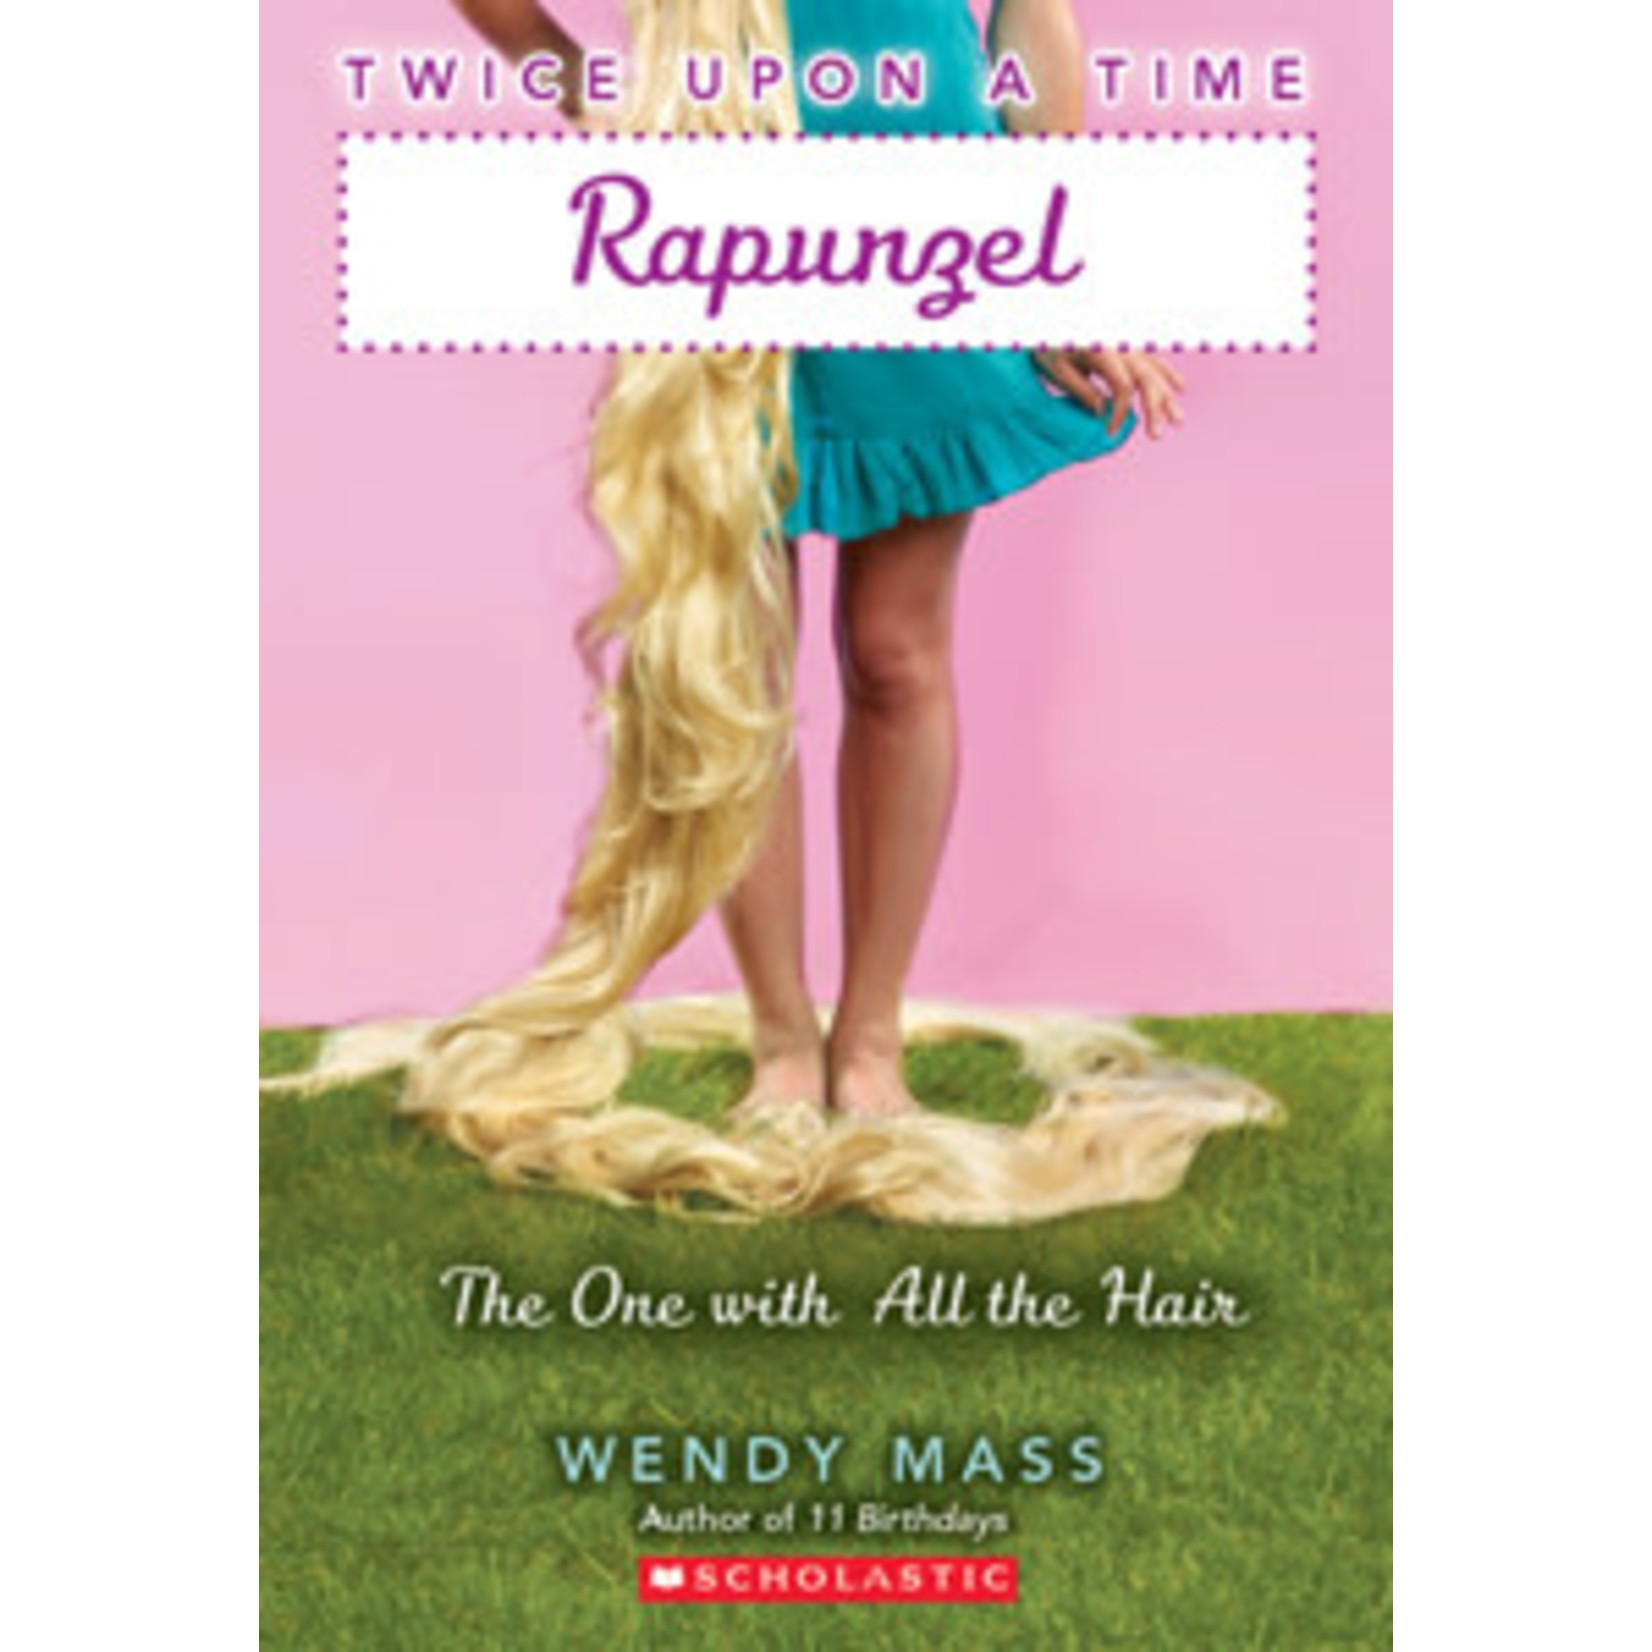 Wendy Mass Twice Upon a Time  Rapunzel   The One with All the Hair